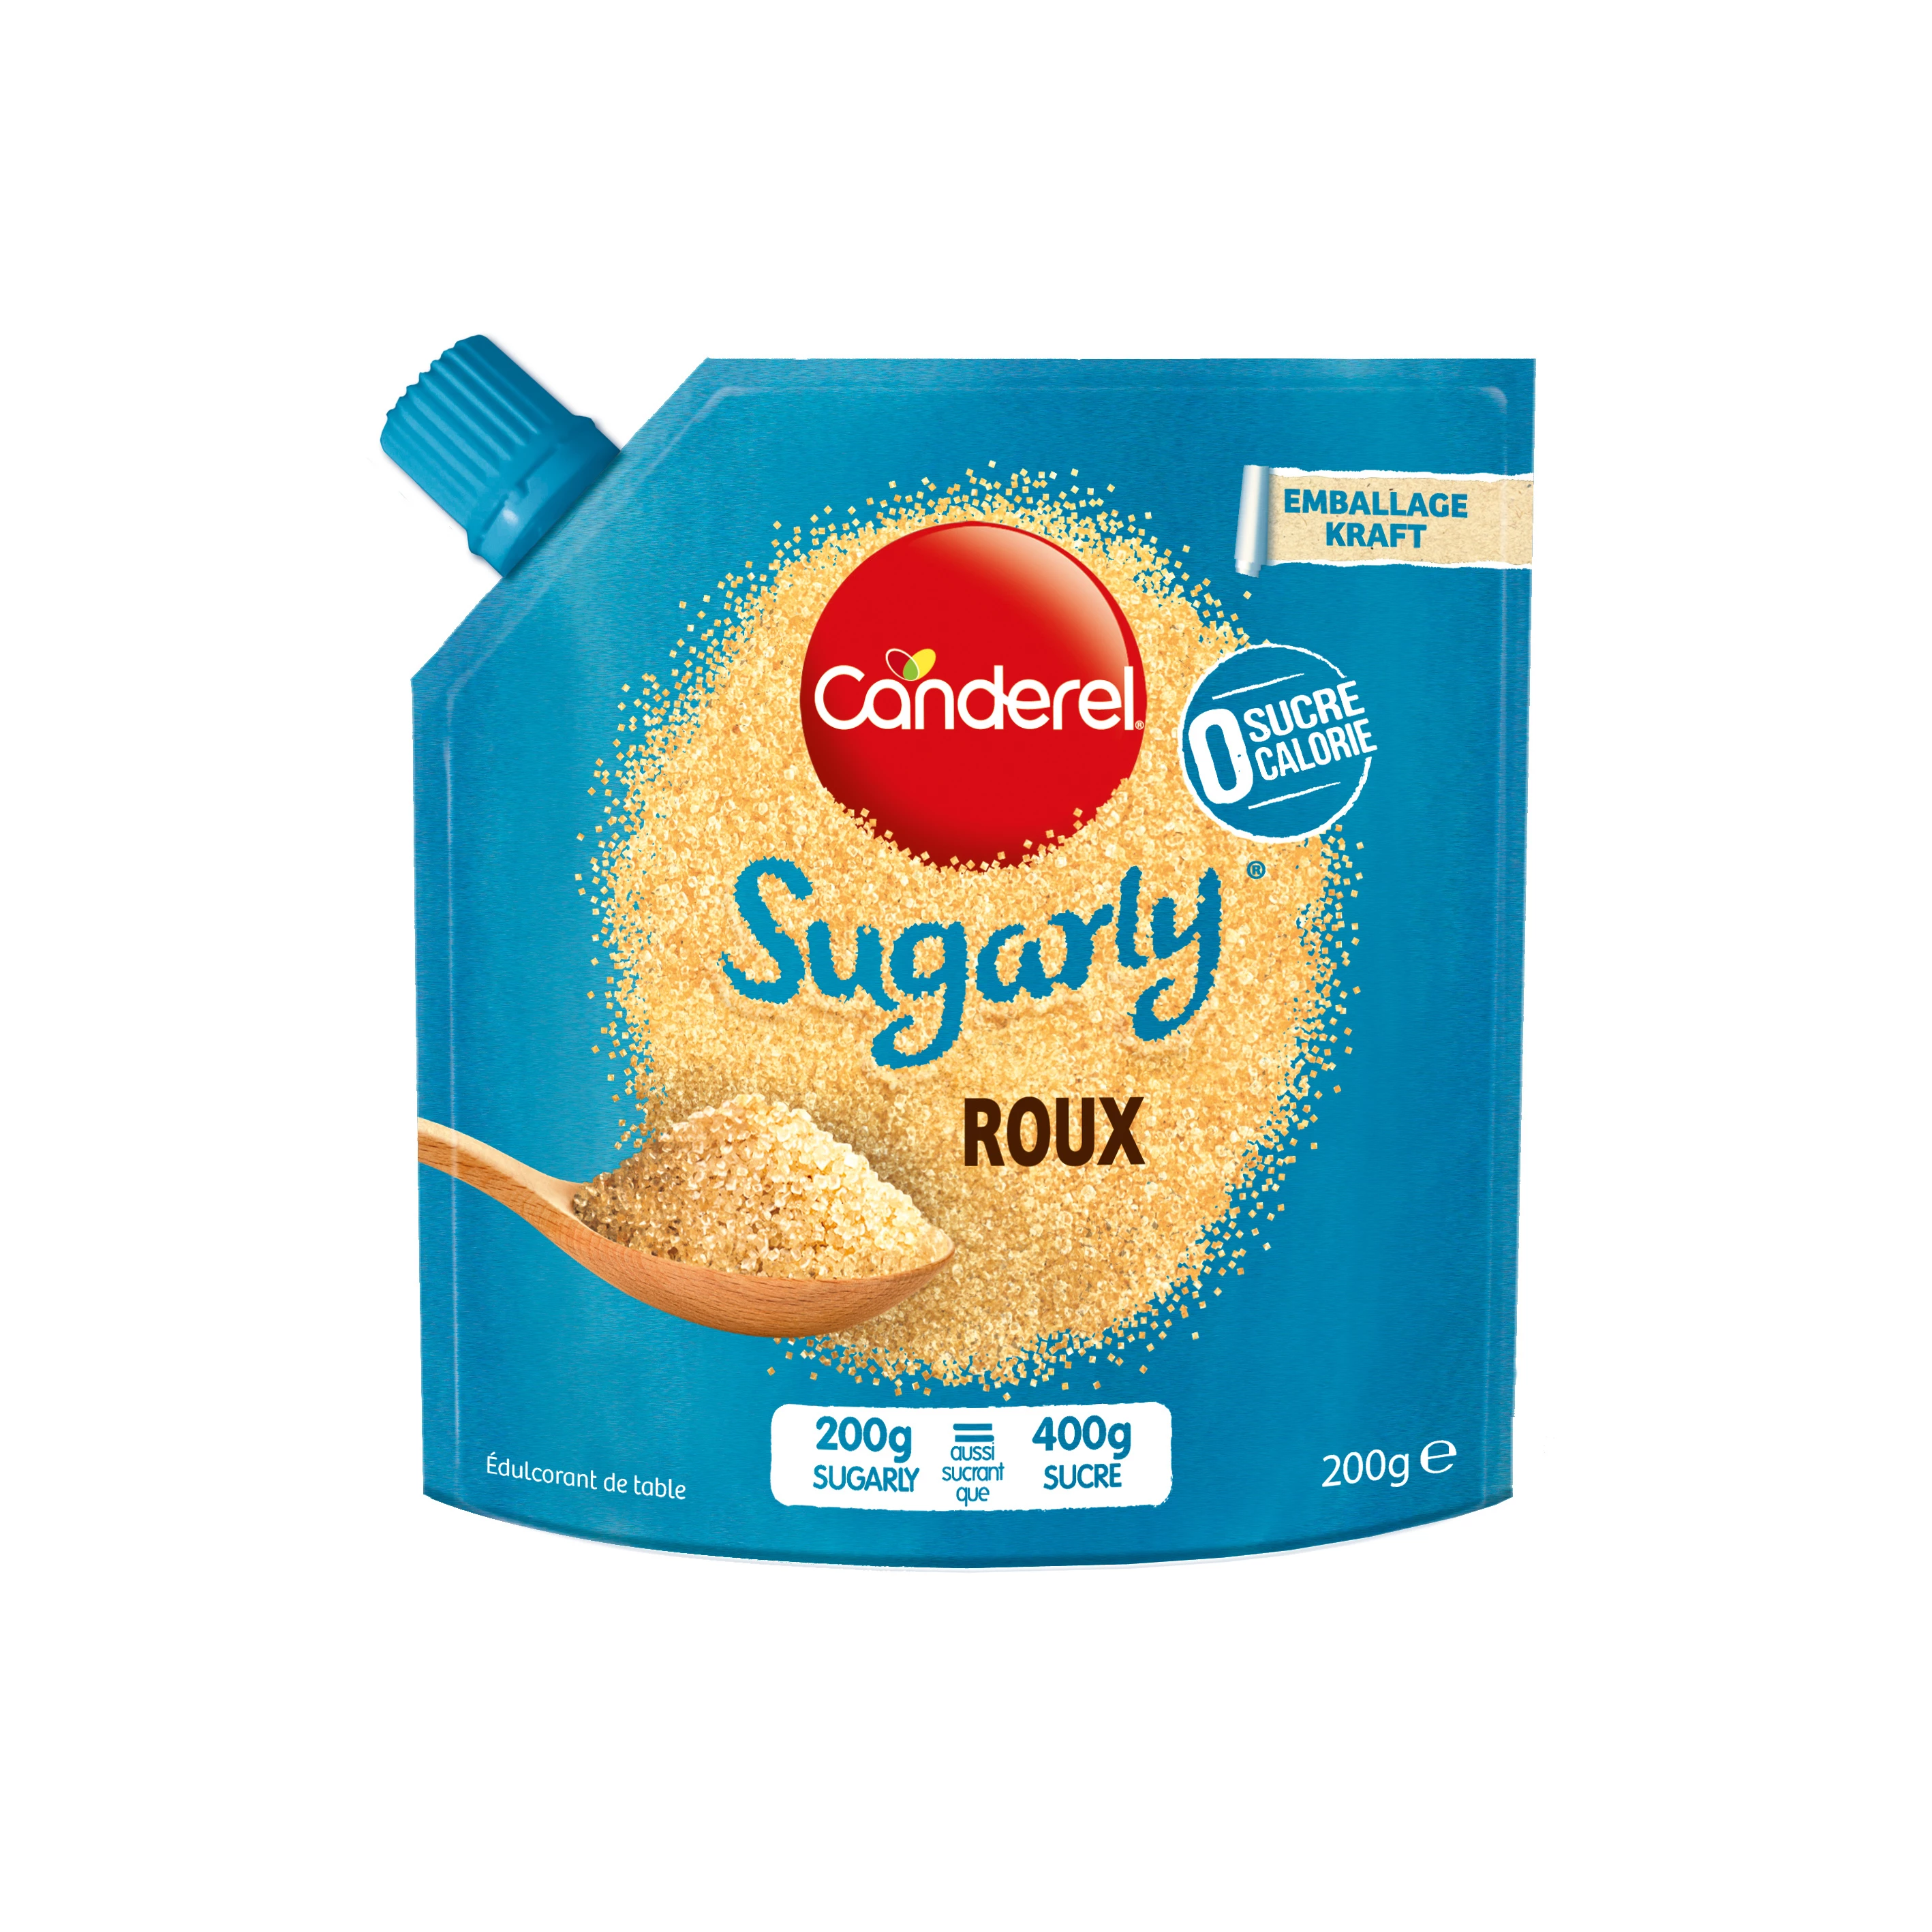 Canderel Sugarly Roux 200g Do